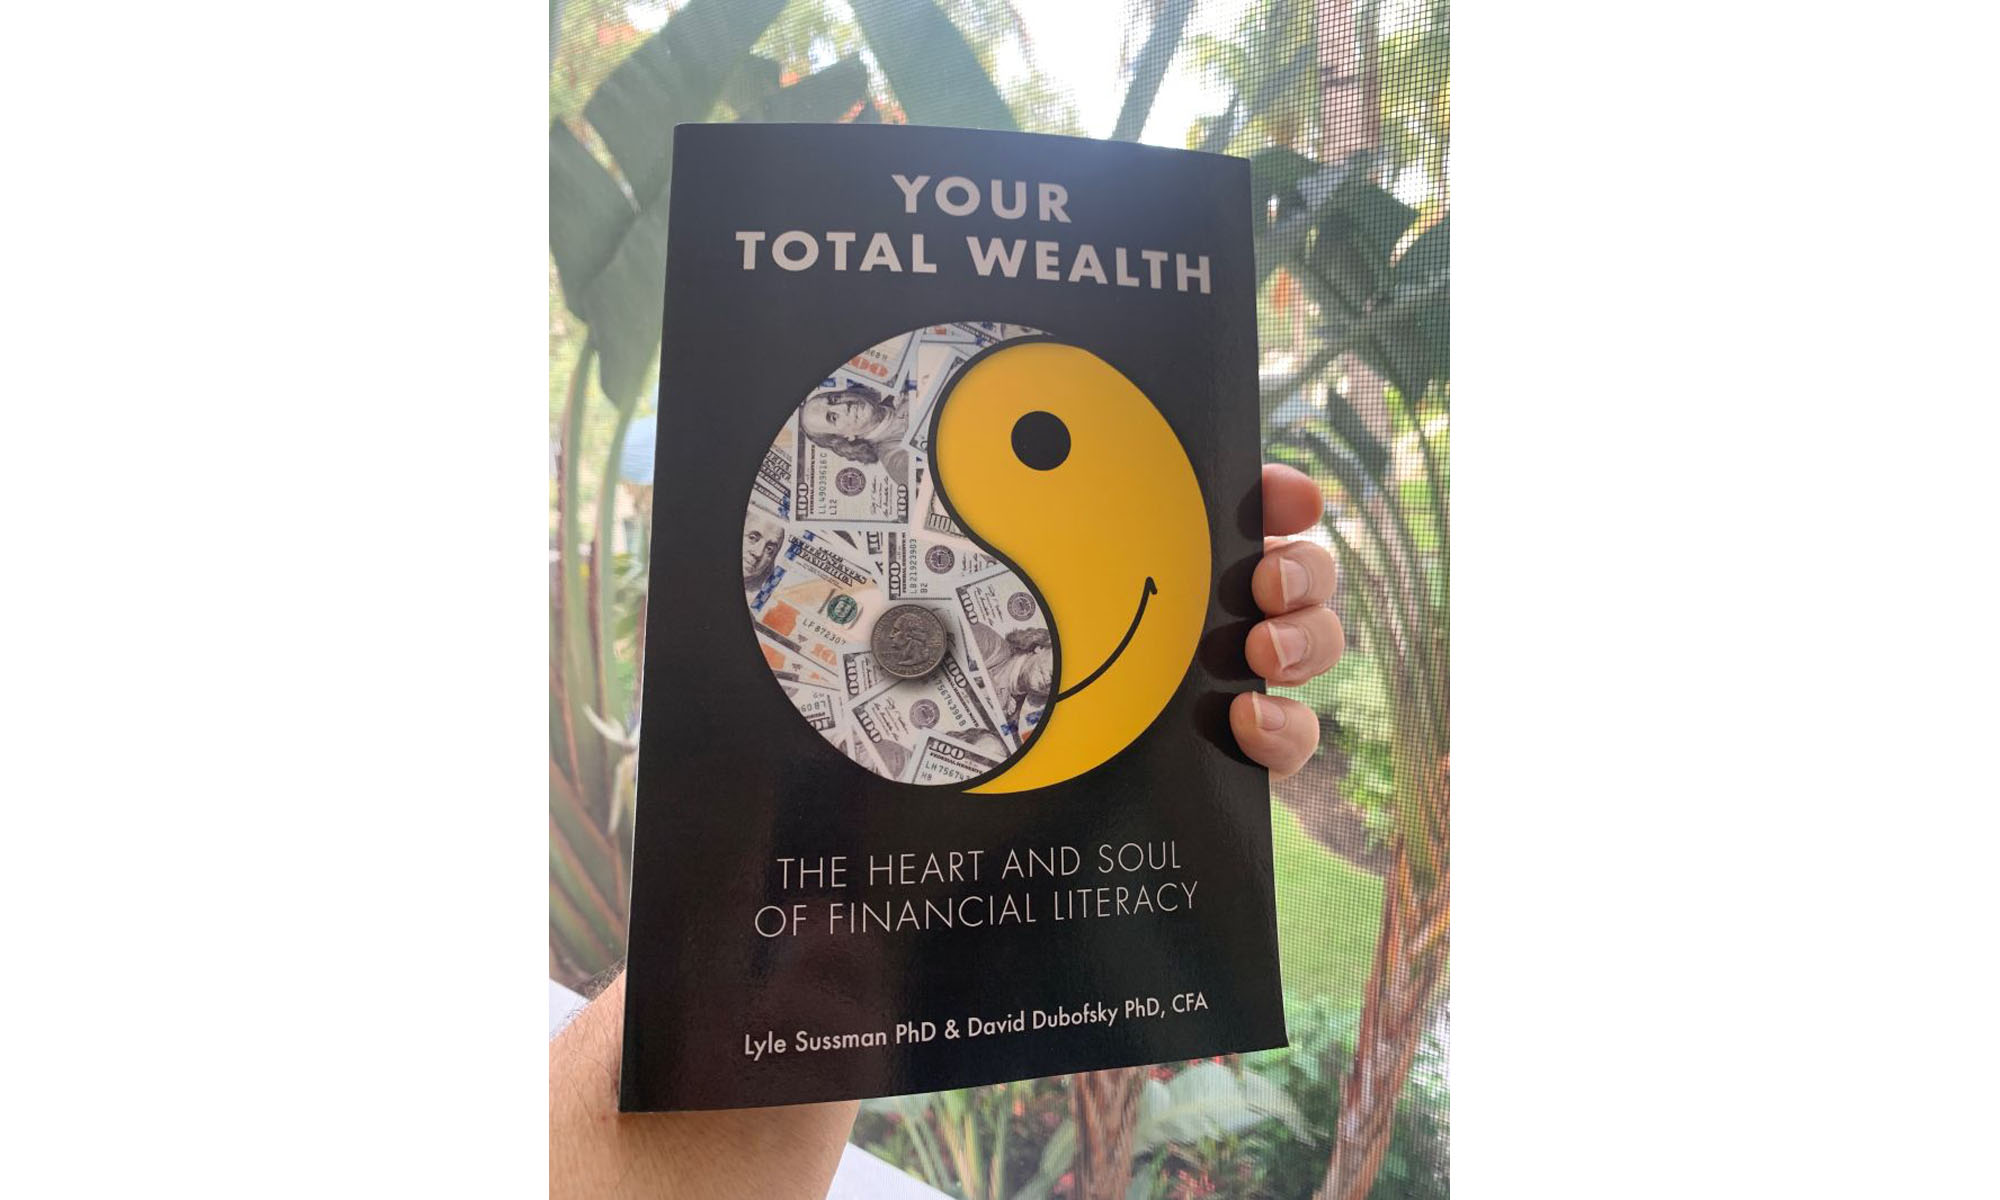 Achieving Your Total Wealth is a journey that begins with WHY, not WHAT and HOW